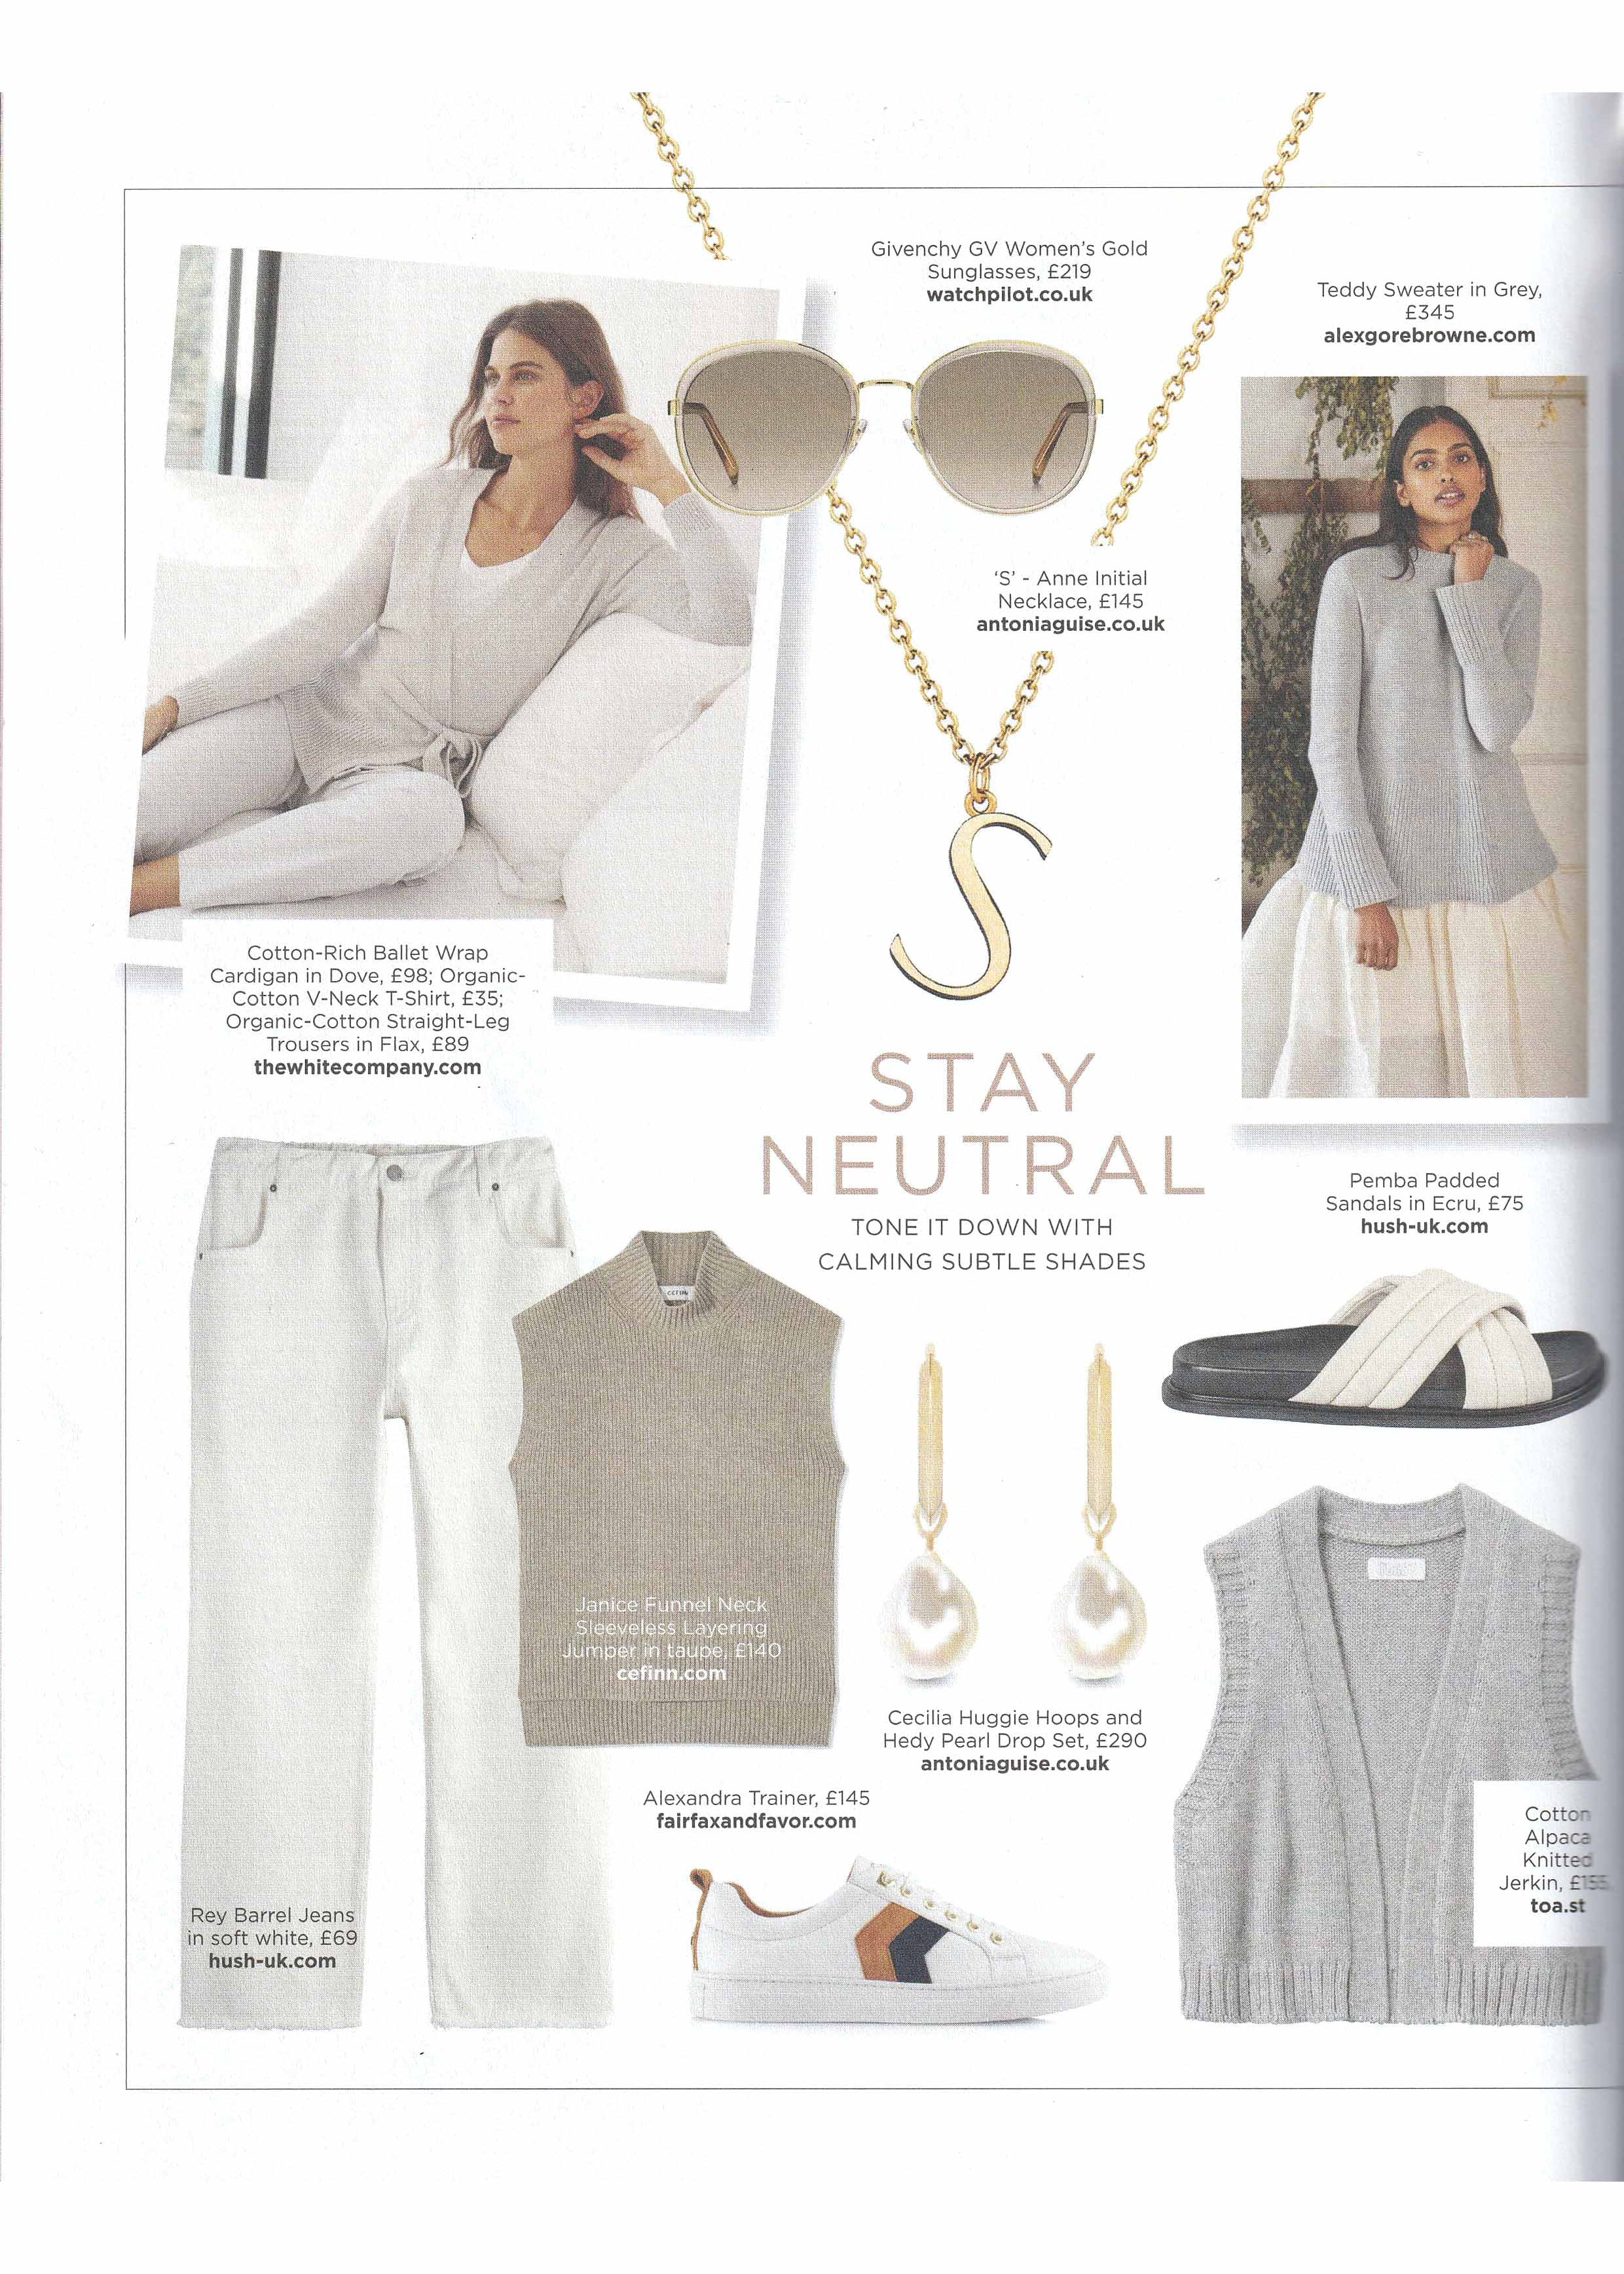 Screenshot of our inclusion in Wildflower Magazine's Stay Neutral feature. Featuring our Antonia Guise Cecilia Huggie Hoops + Hedy Pearl Drop Set